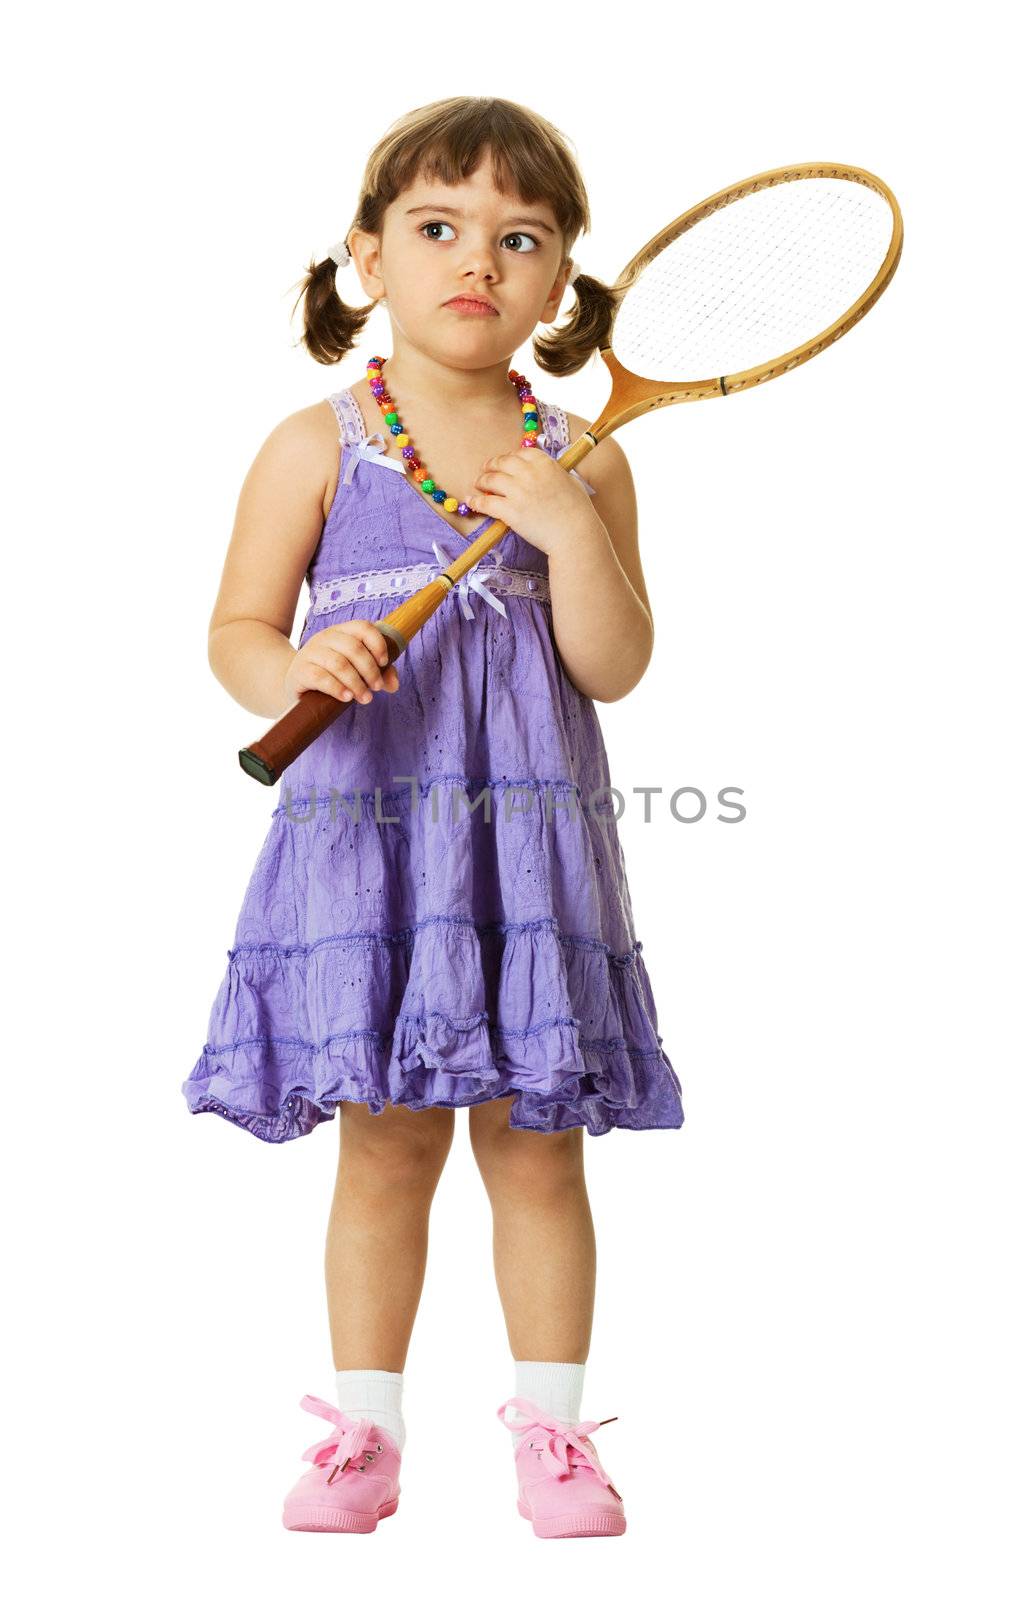 Little girl with a badminton racket isolated on white background